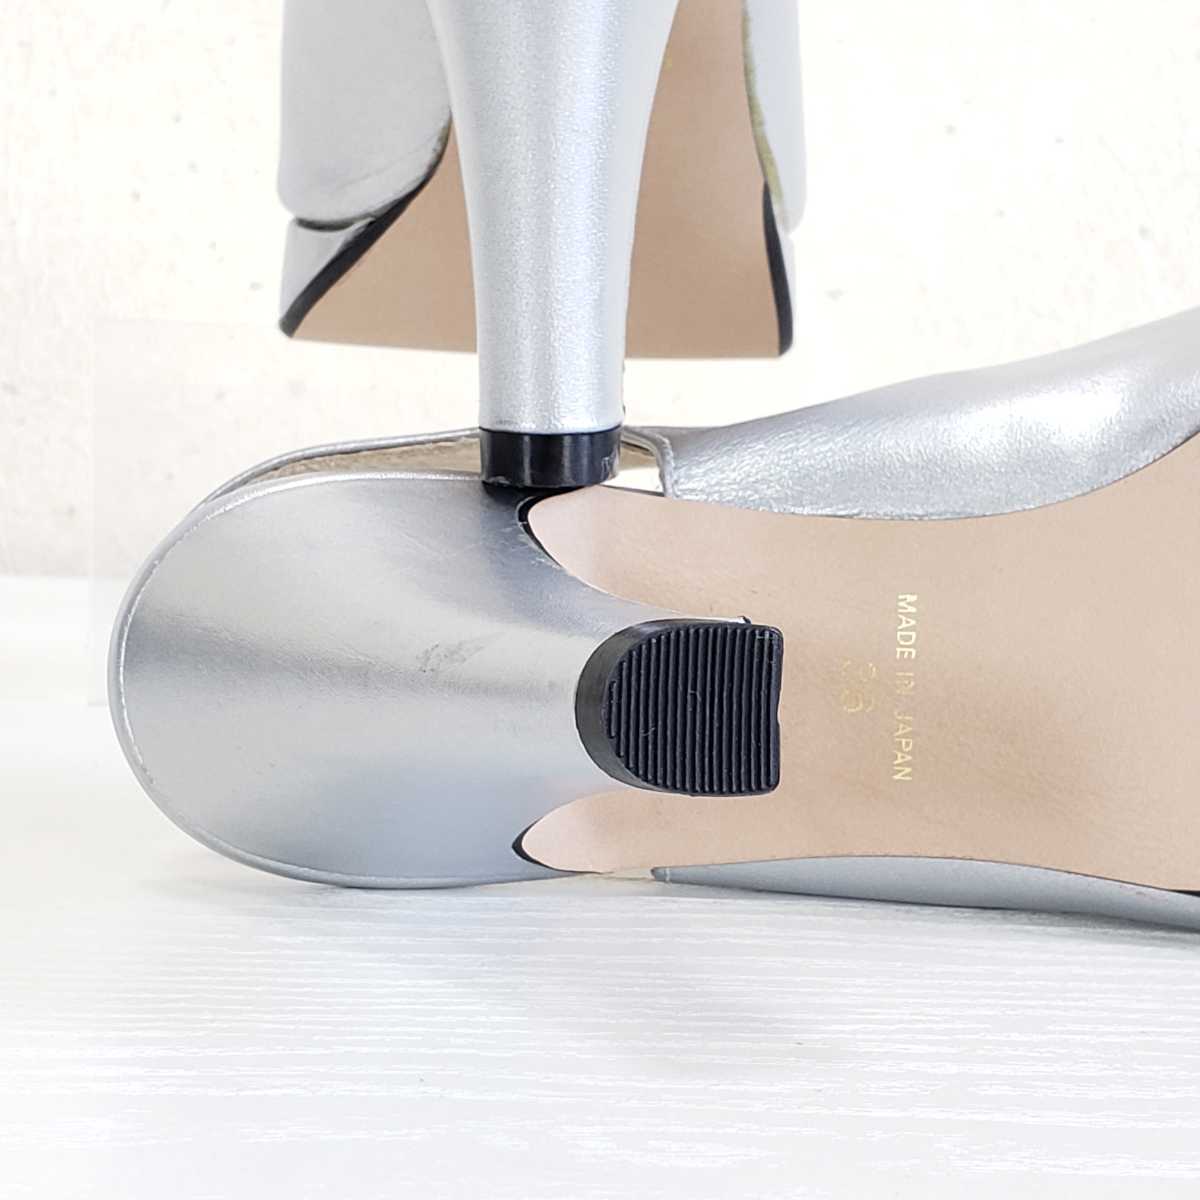  as good as new *DAMA collectionda-ma collection original leather strap pumps high heel lady's (36#23~23.5cm) silver 